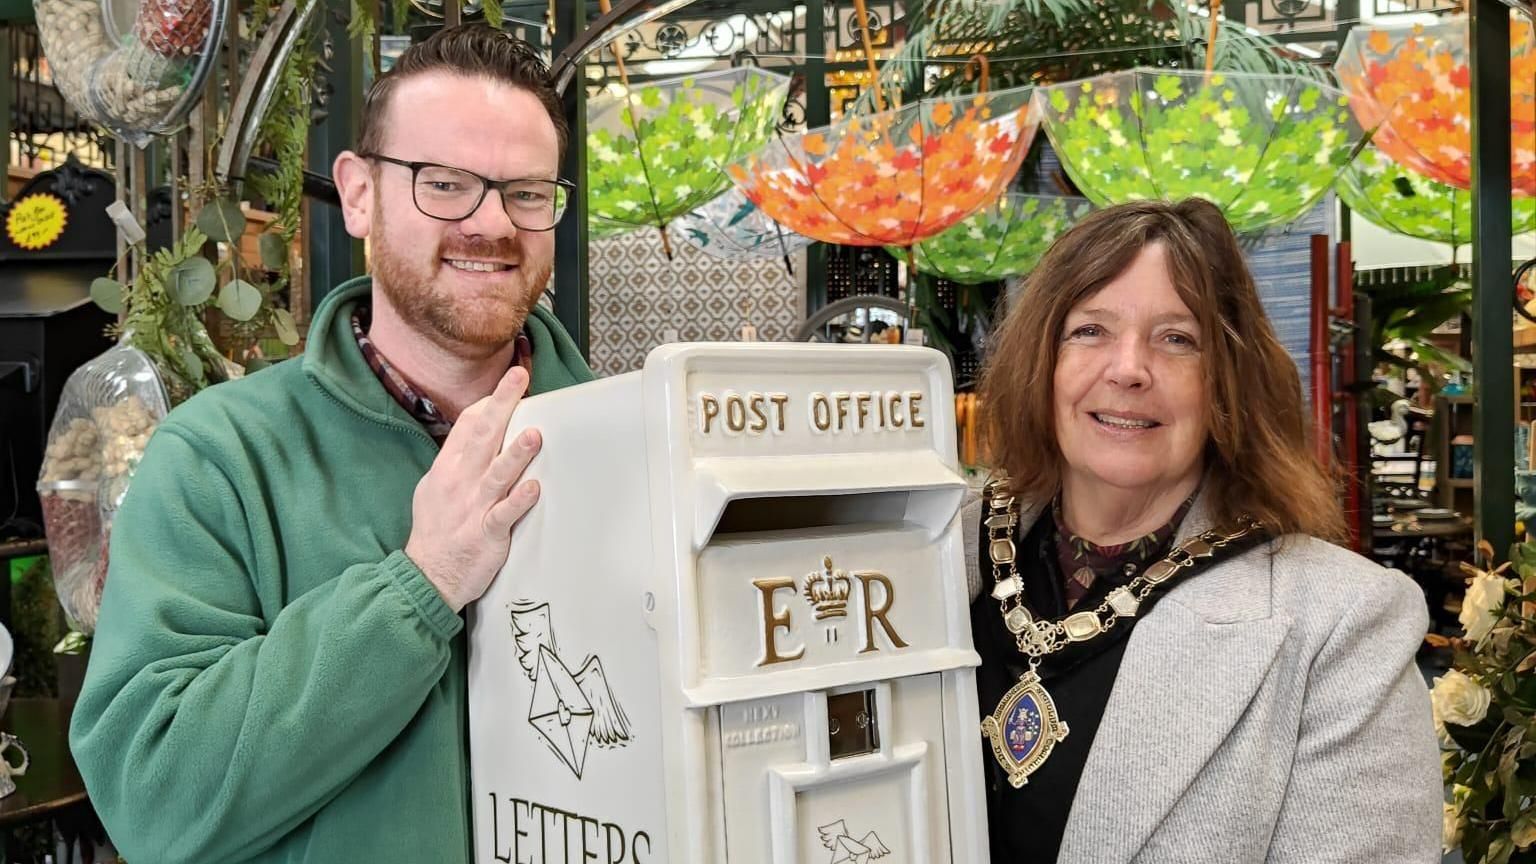 A man and woman holding a postbox